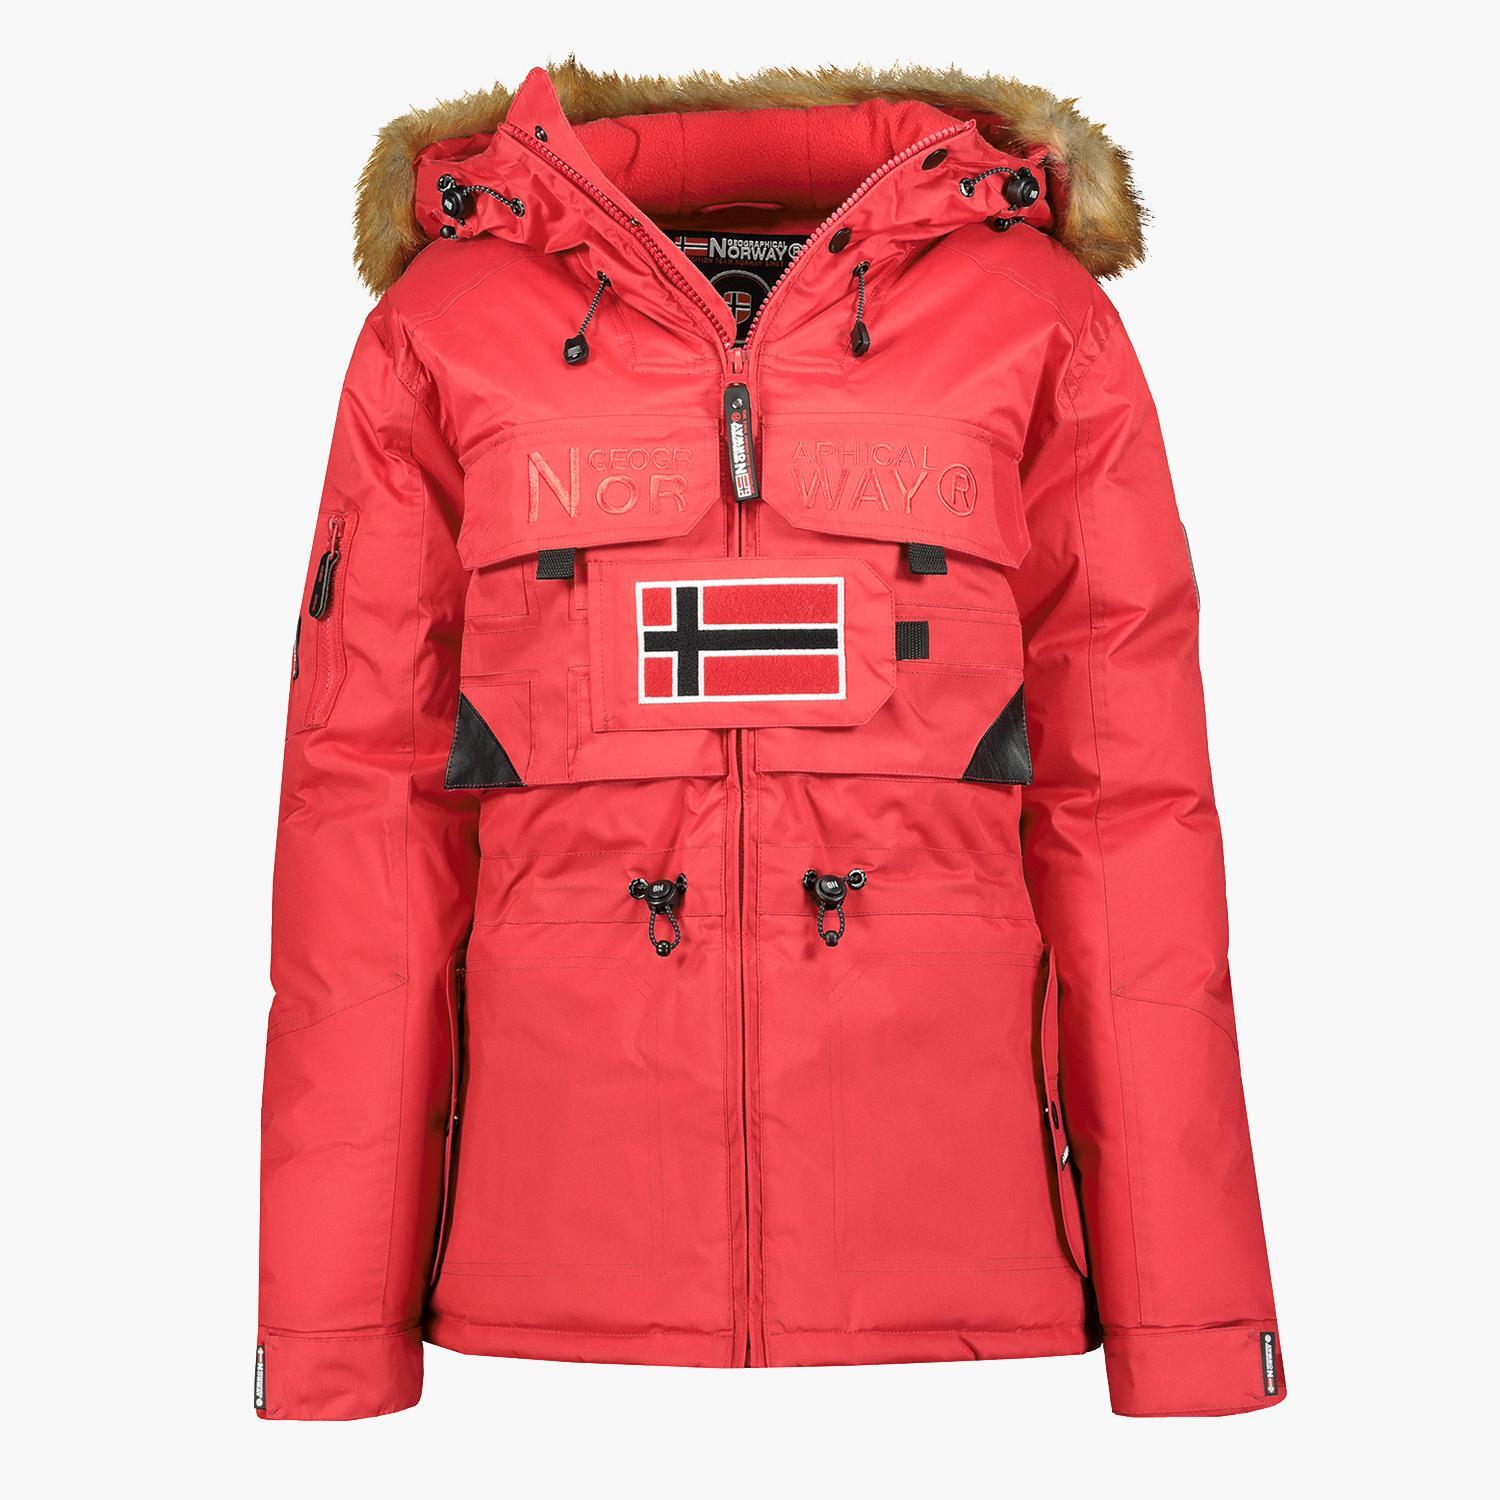 Geographical norway Bench Rood Anorak Jas Heren